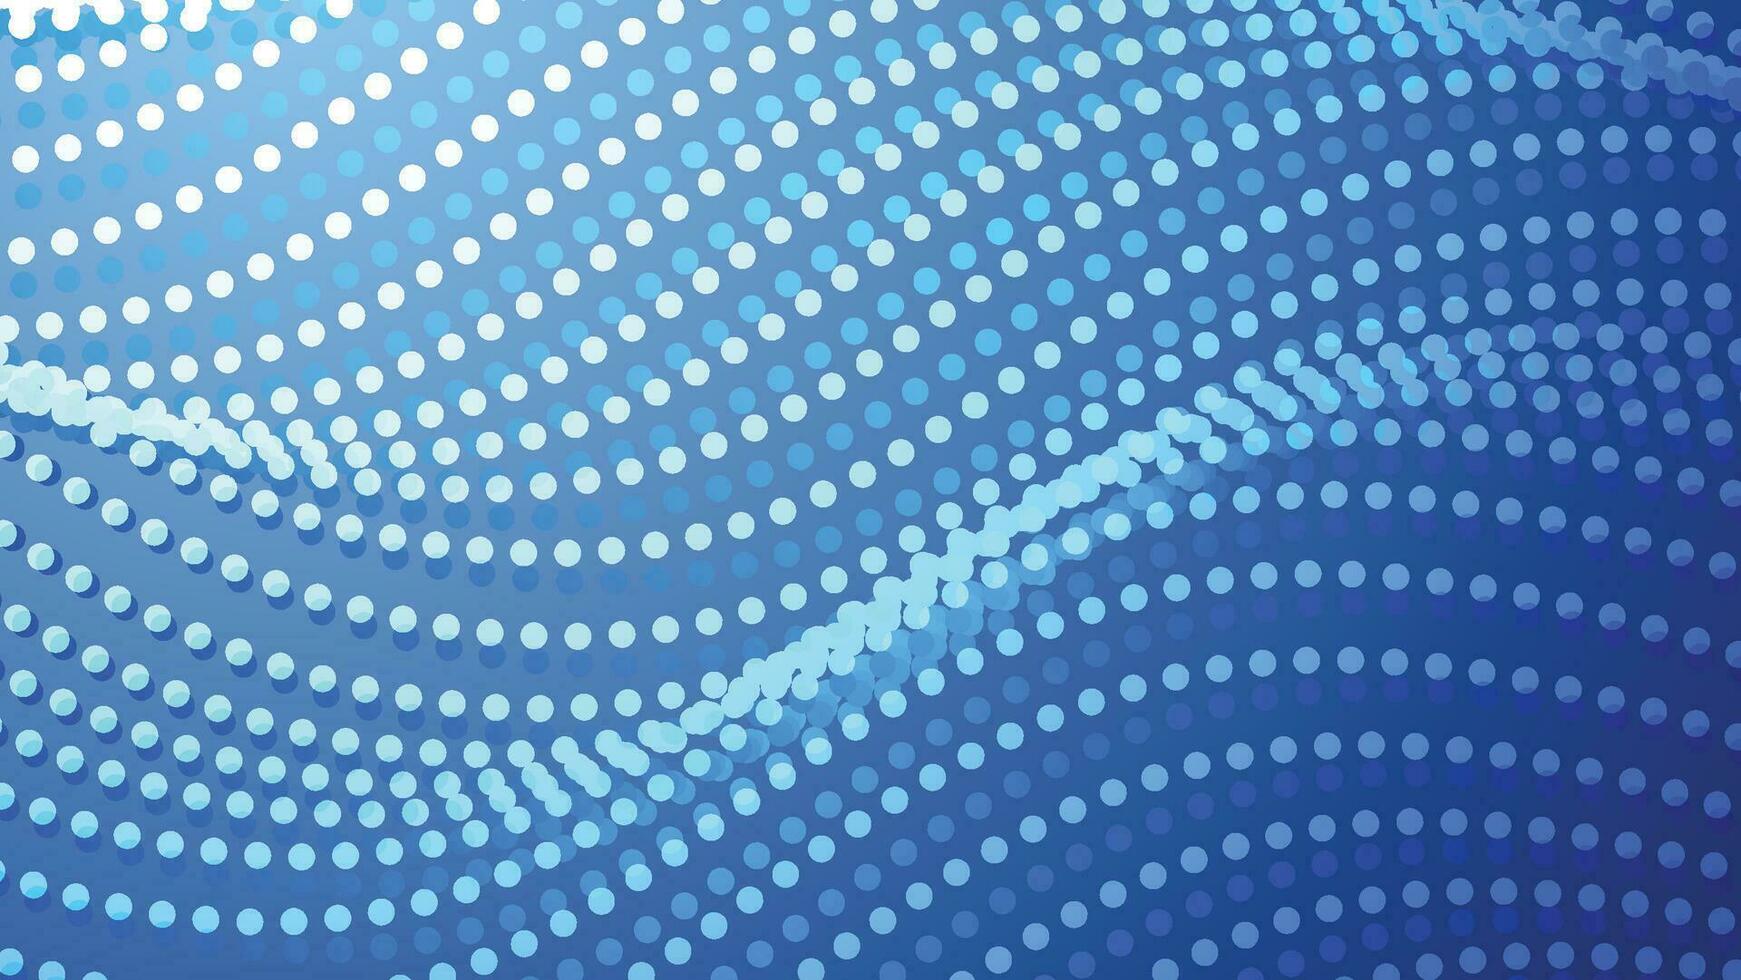 abstract background with dots wavy pattern on blue color gradient vector